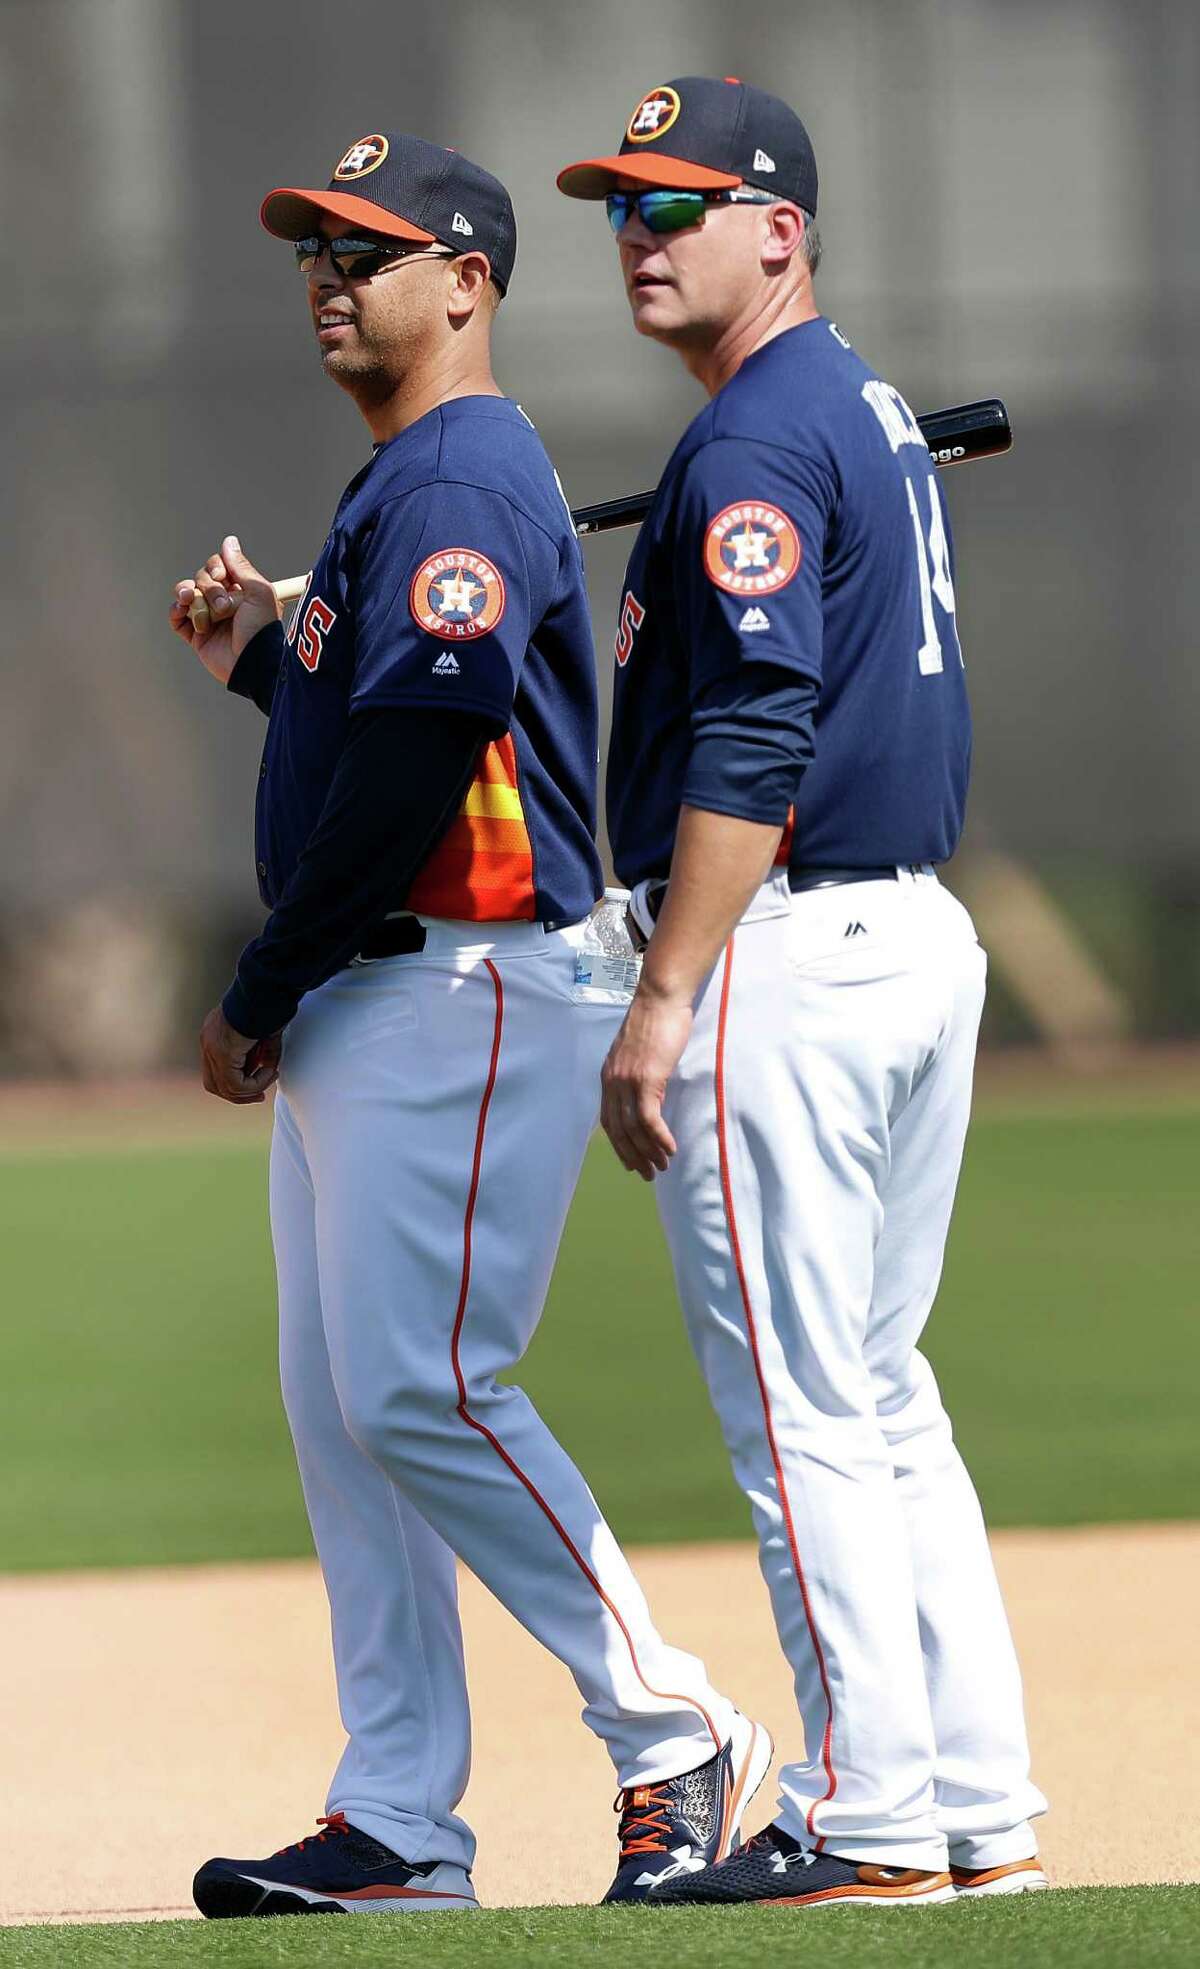 Houston Astros manager A.J. Hinch chats with his bench coach Alex Cora as the Astros pitchers and catchers held their first workout of spring training at The Ballpark of the Palm Beaches, in West Palm Beach, Florida, Tuesday, February 14, 2017.